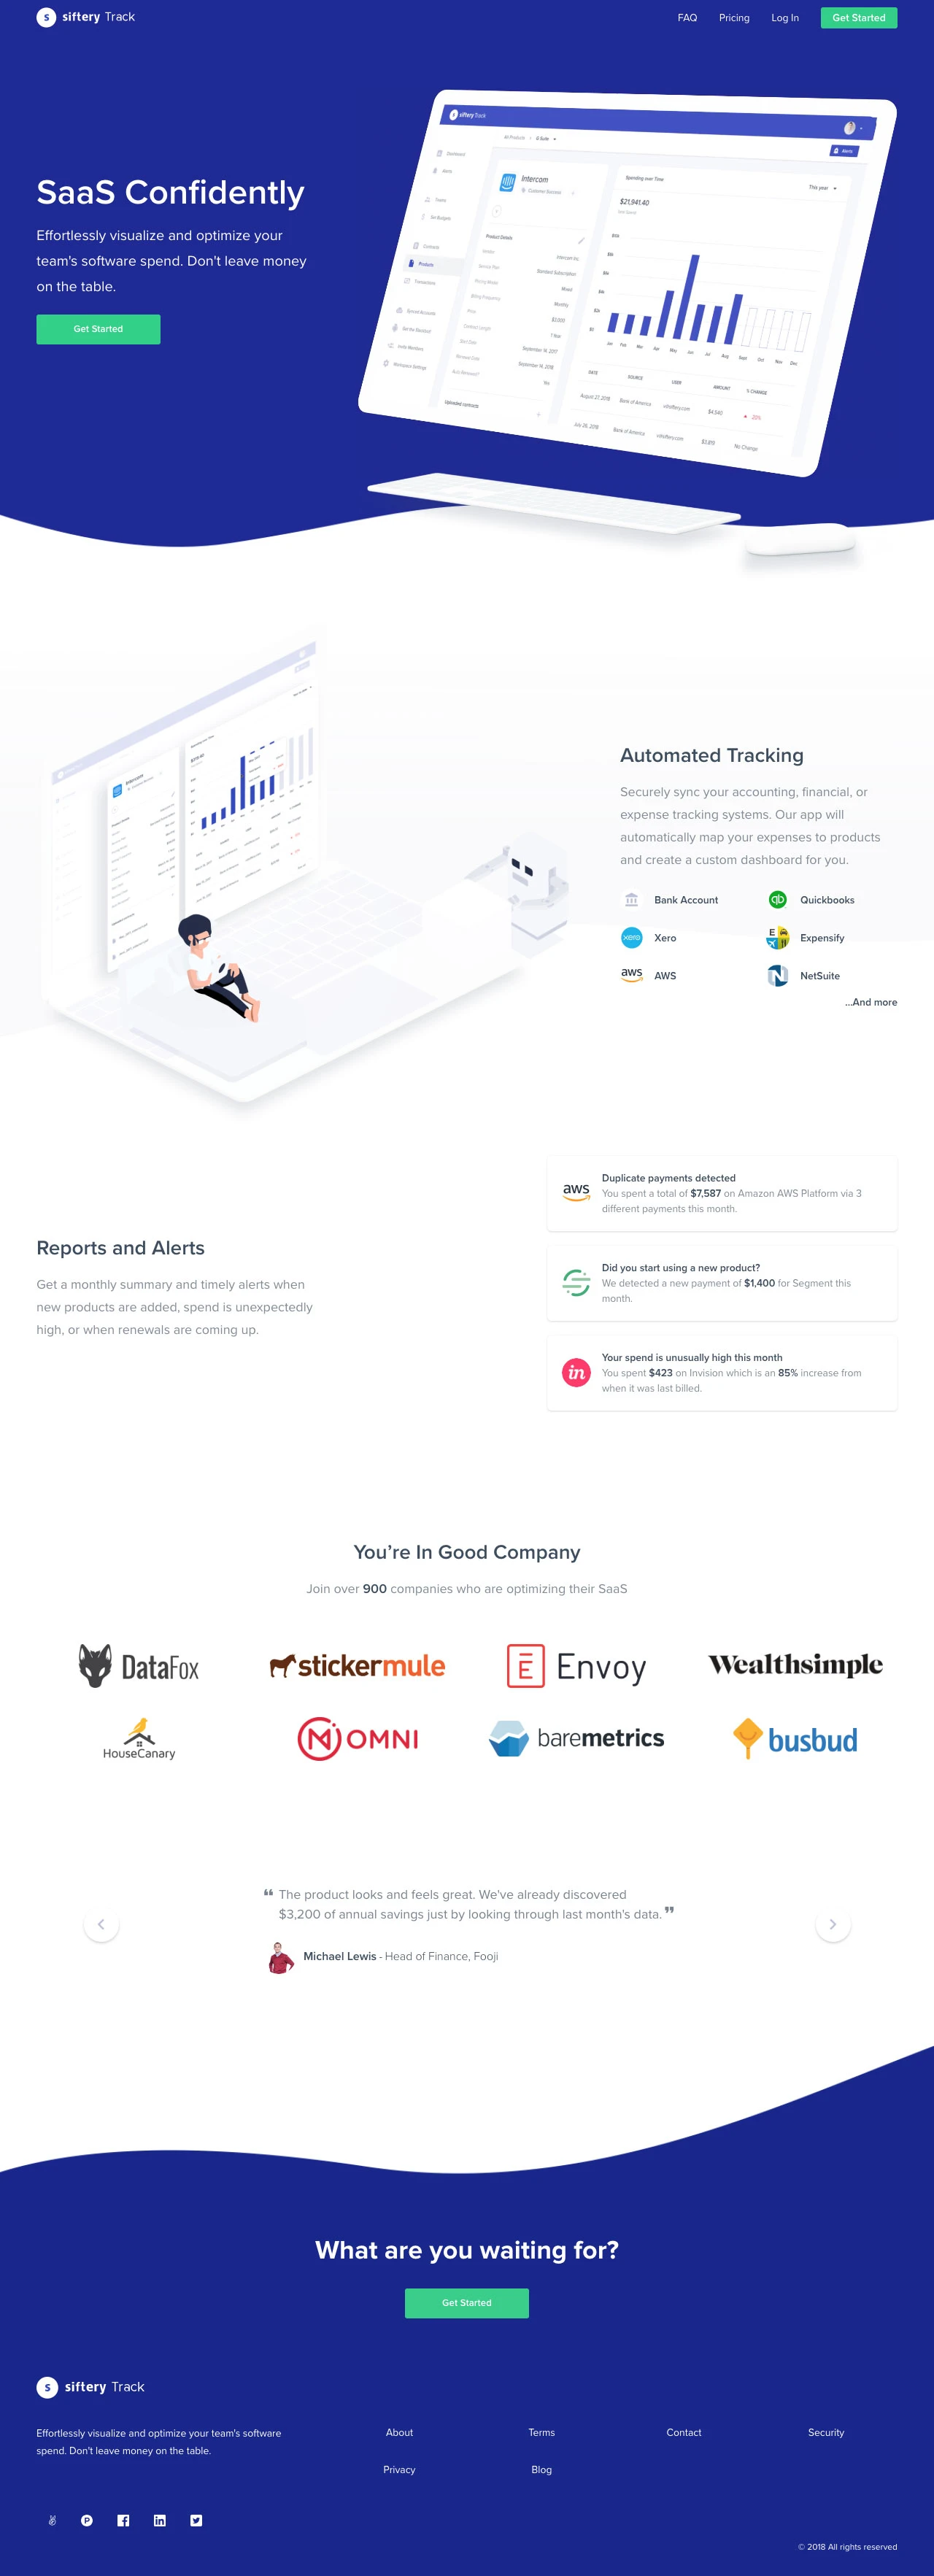 Siftery Track Landing Page Example: Automatically track all software and cloud services your team is paying for. Easily identify duplicate payments, unexpected increases in spend, and apps you no longer use. Sync your bank account, credit card, Xero, or Quickbooks.